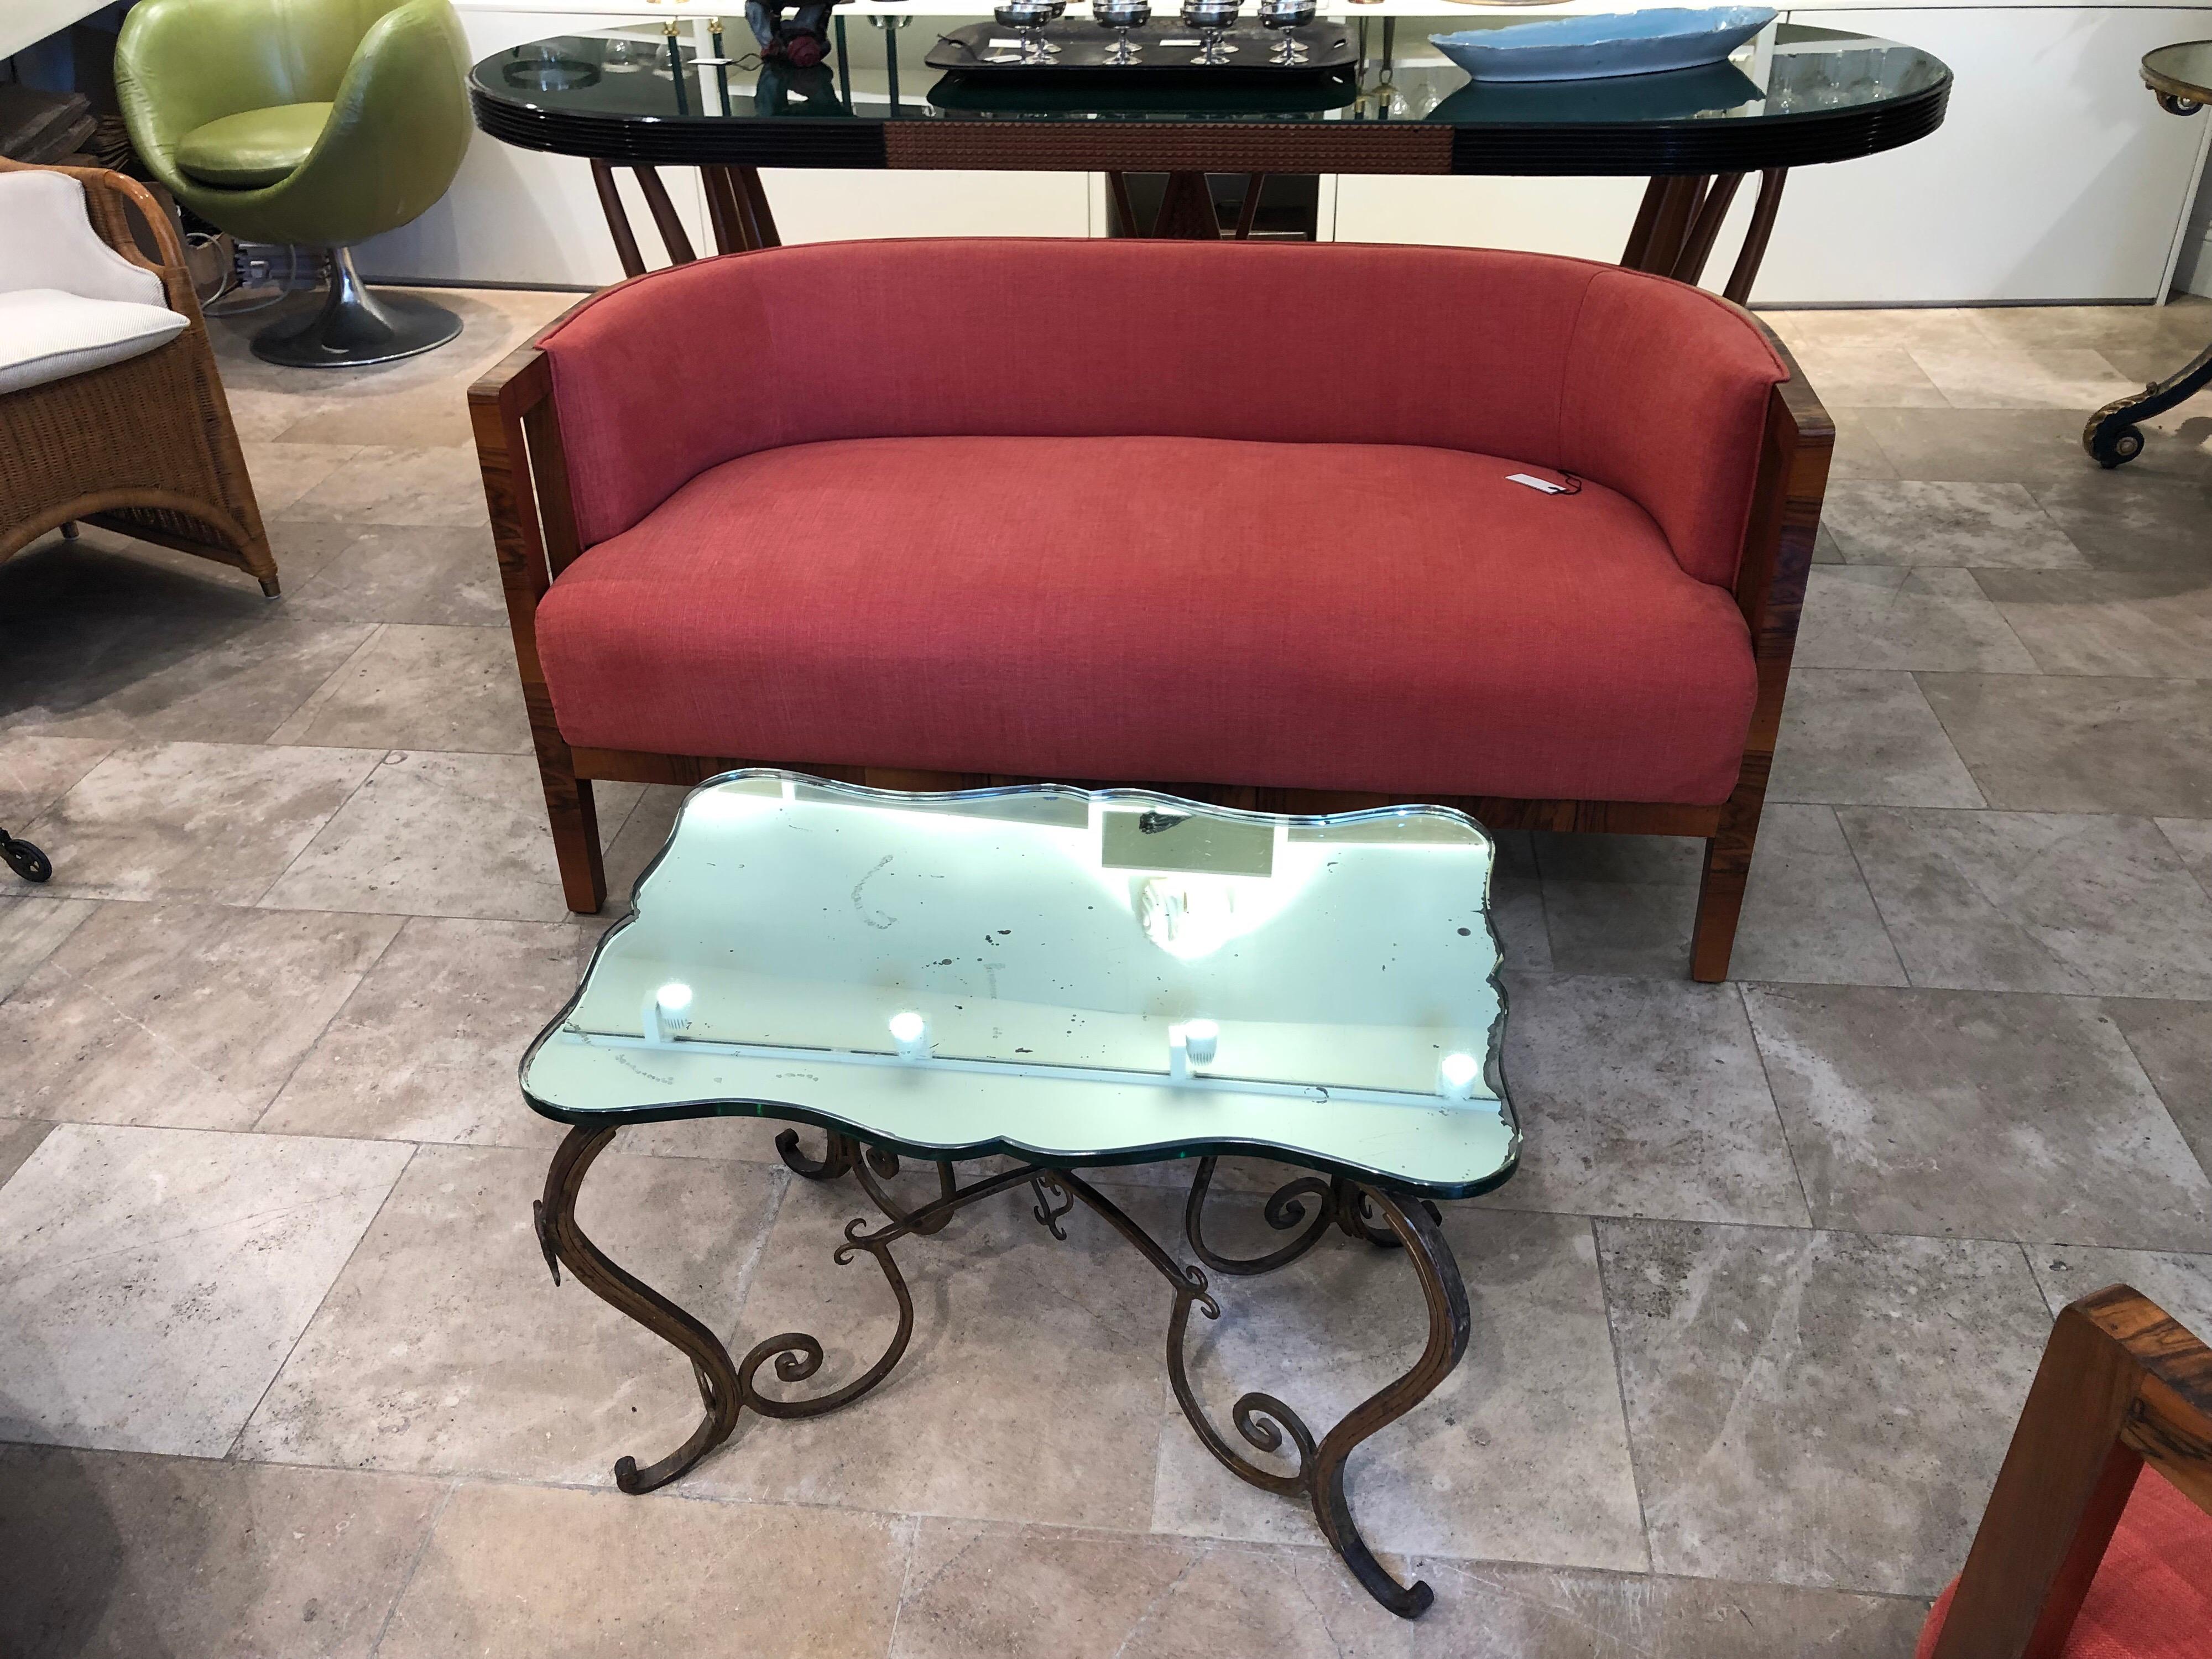 Rene Drouet Hand Forged Guilded Metal Table with Original Mirrored Glass Top In Good Condition For Sale In London, GB